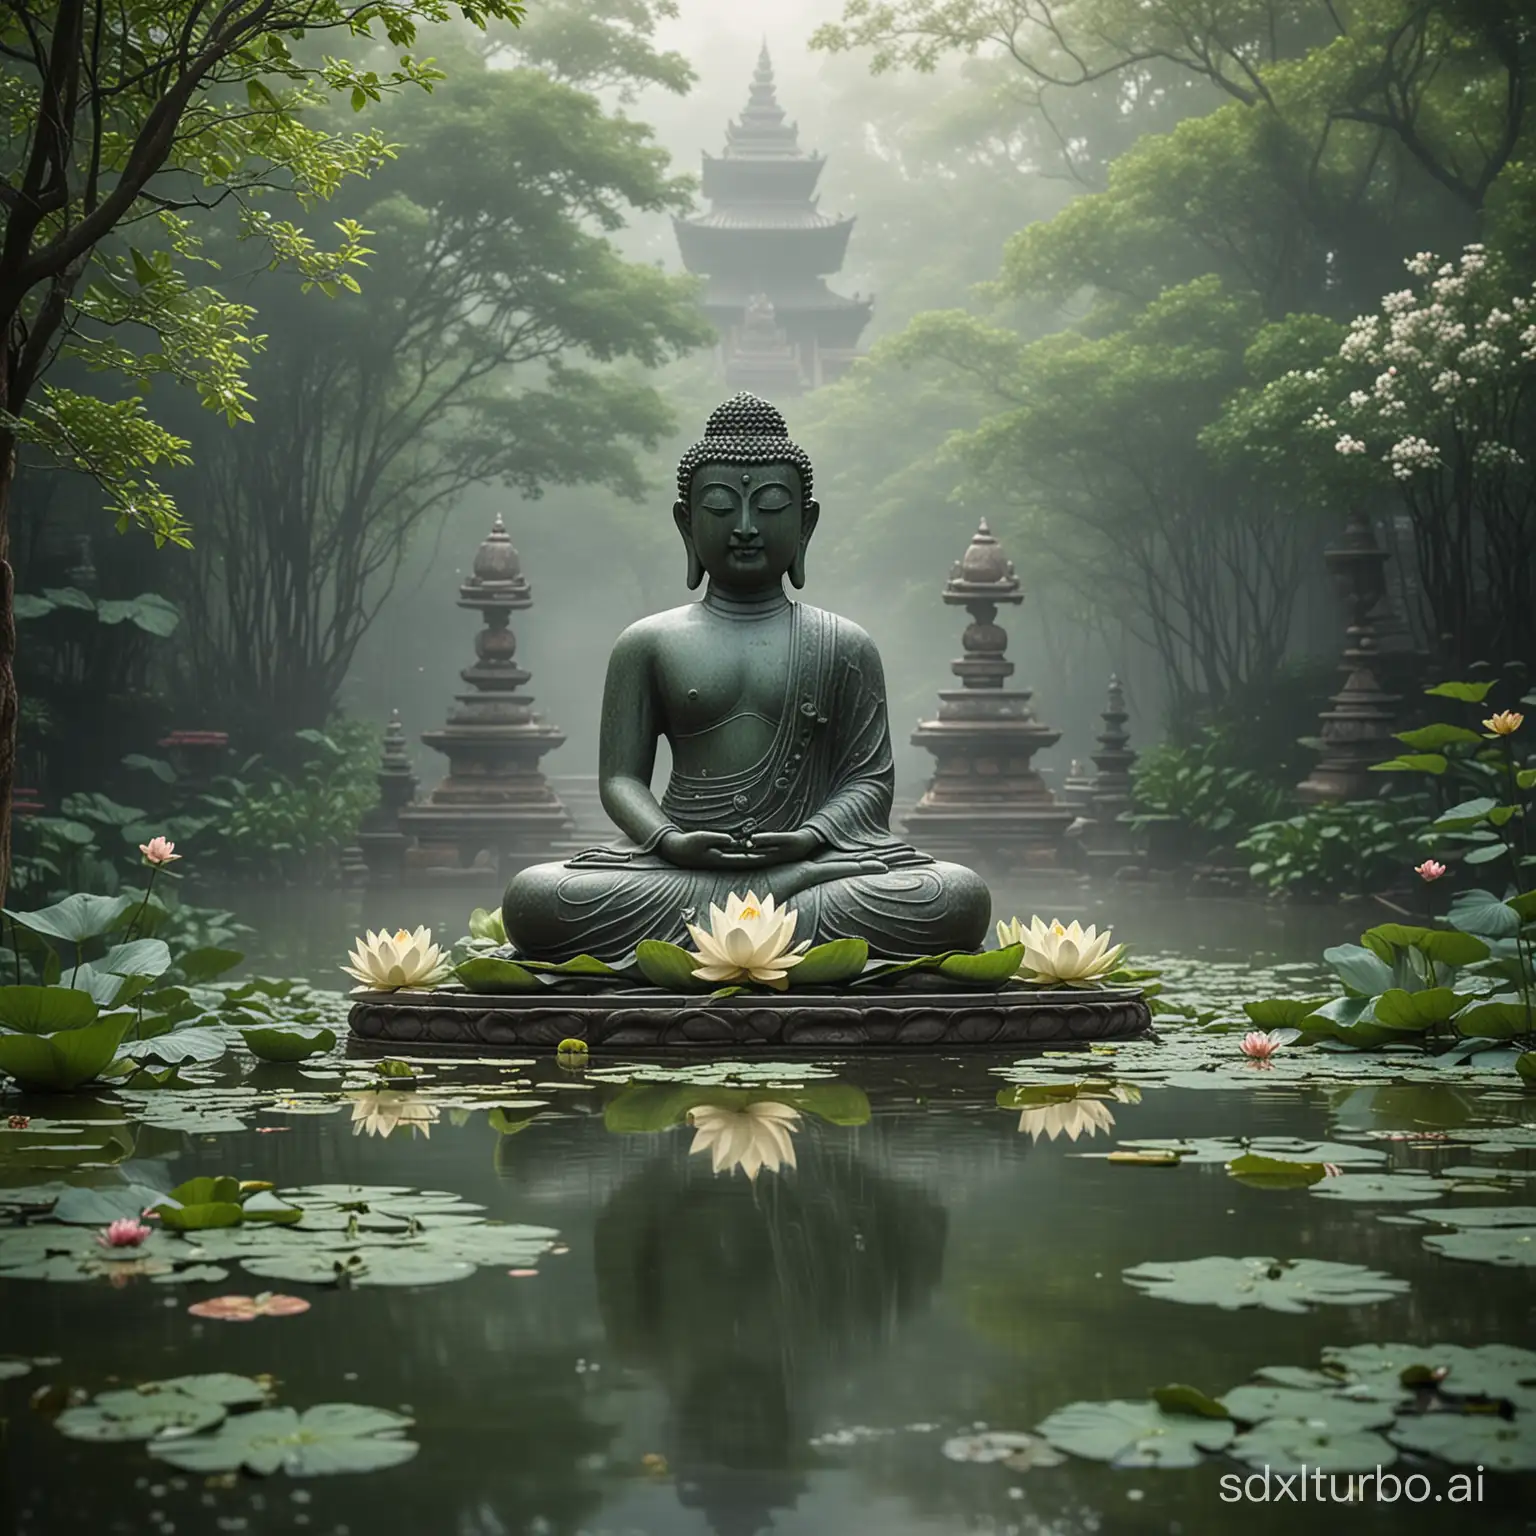 a photorealistic, detailed, bokeh, mist, inspiring, tranquil, symmetric, Tibetan temple backyard, Buddha statue, meditation space lush with green vegetation and water flowing in the middle, blooming lotus on the water, warm and inviting, the image is symmetric